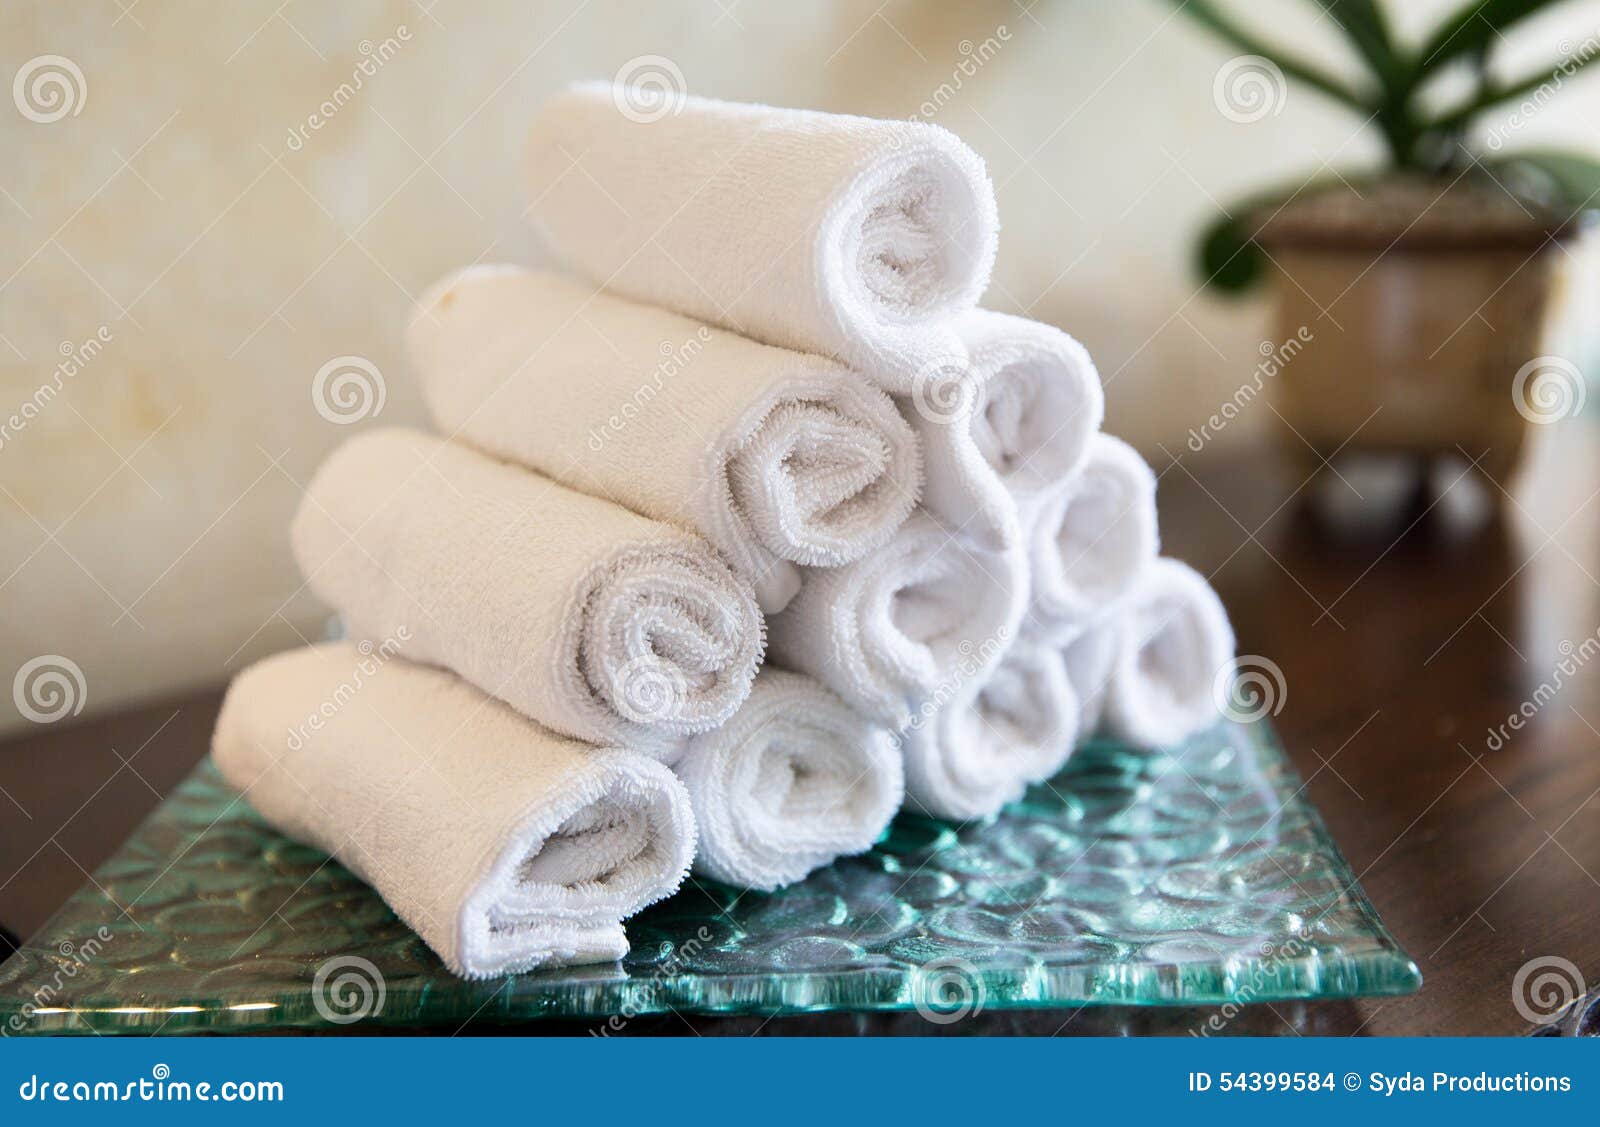 164 Rolled Towel Tray Spa Stock Photos - Free & Royalty-Free Stock Photos  from Dreamstime